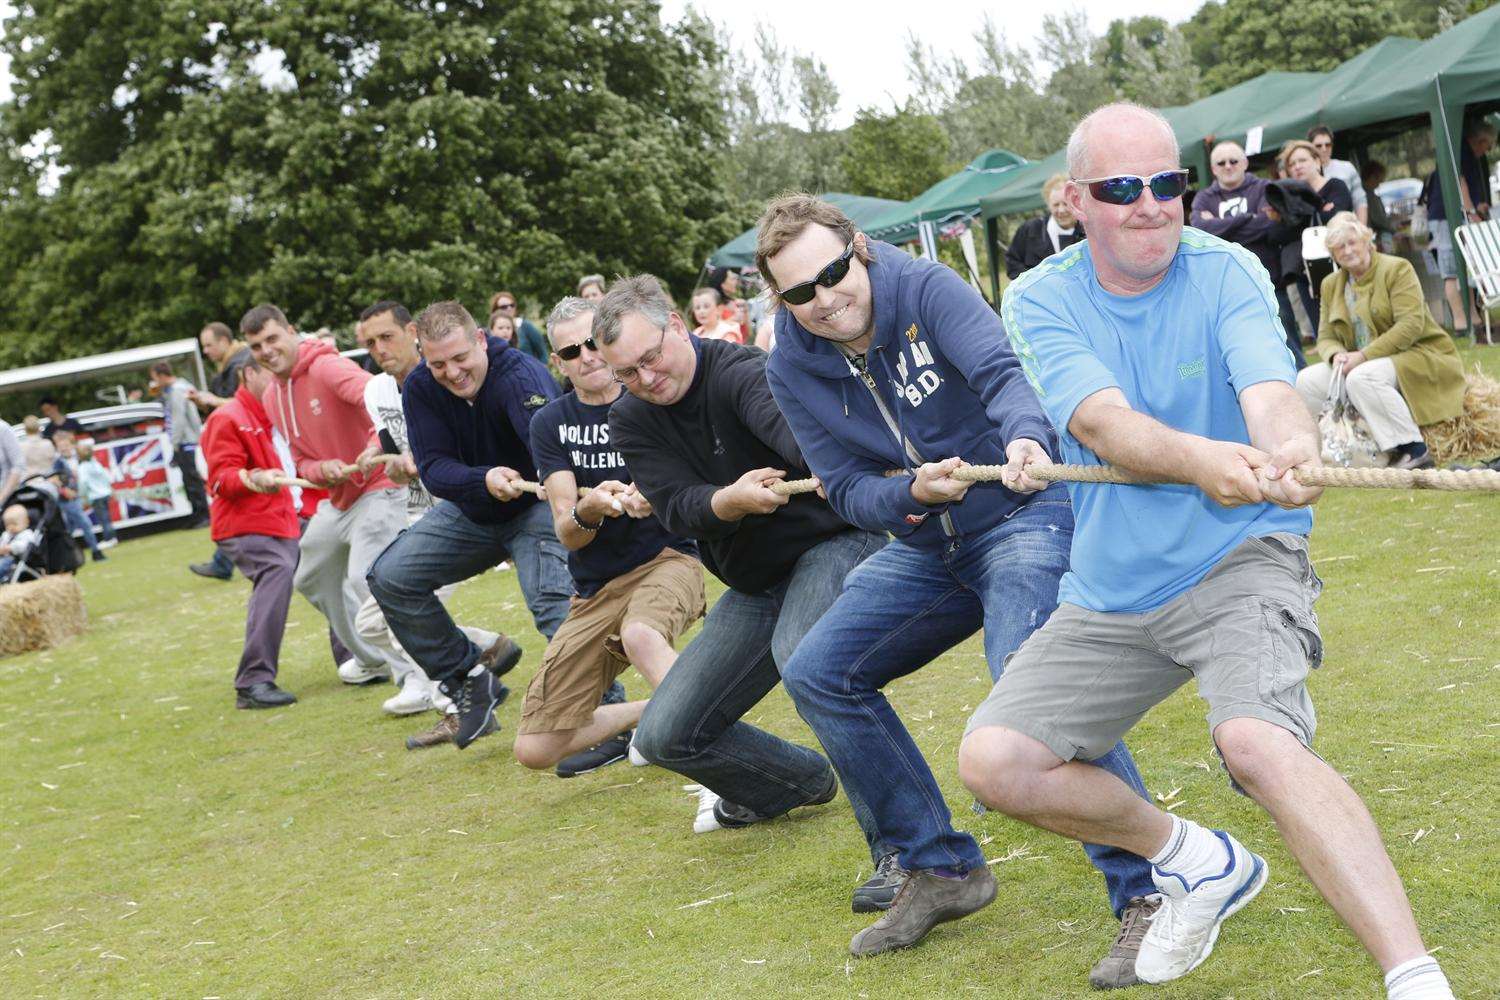 Tug of war is a major event at the annual Weald of Kent Ploughing Match